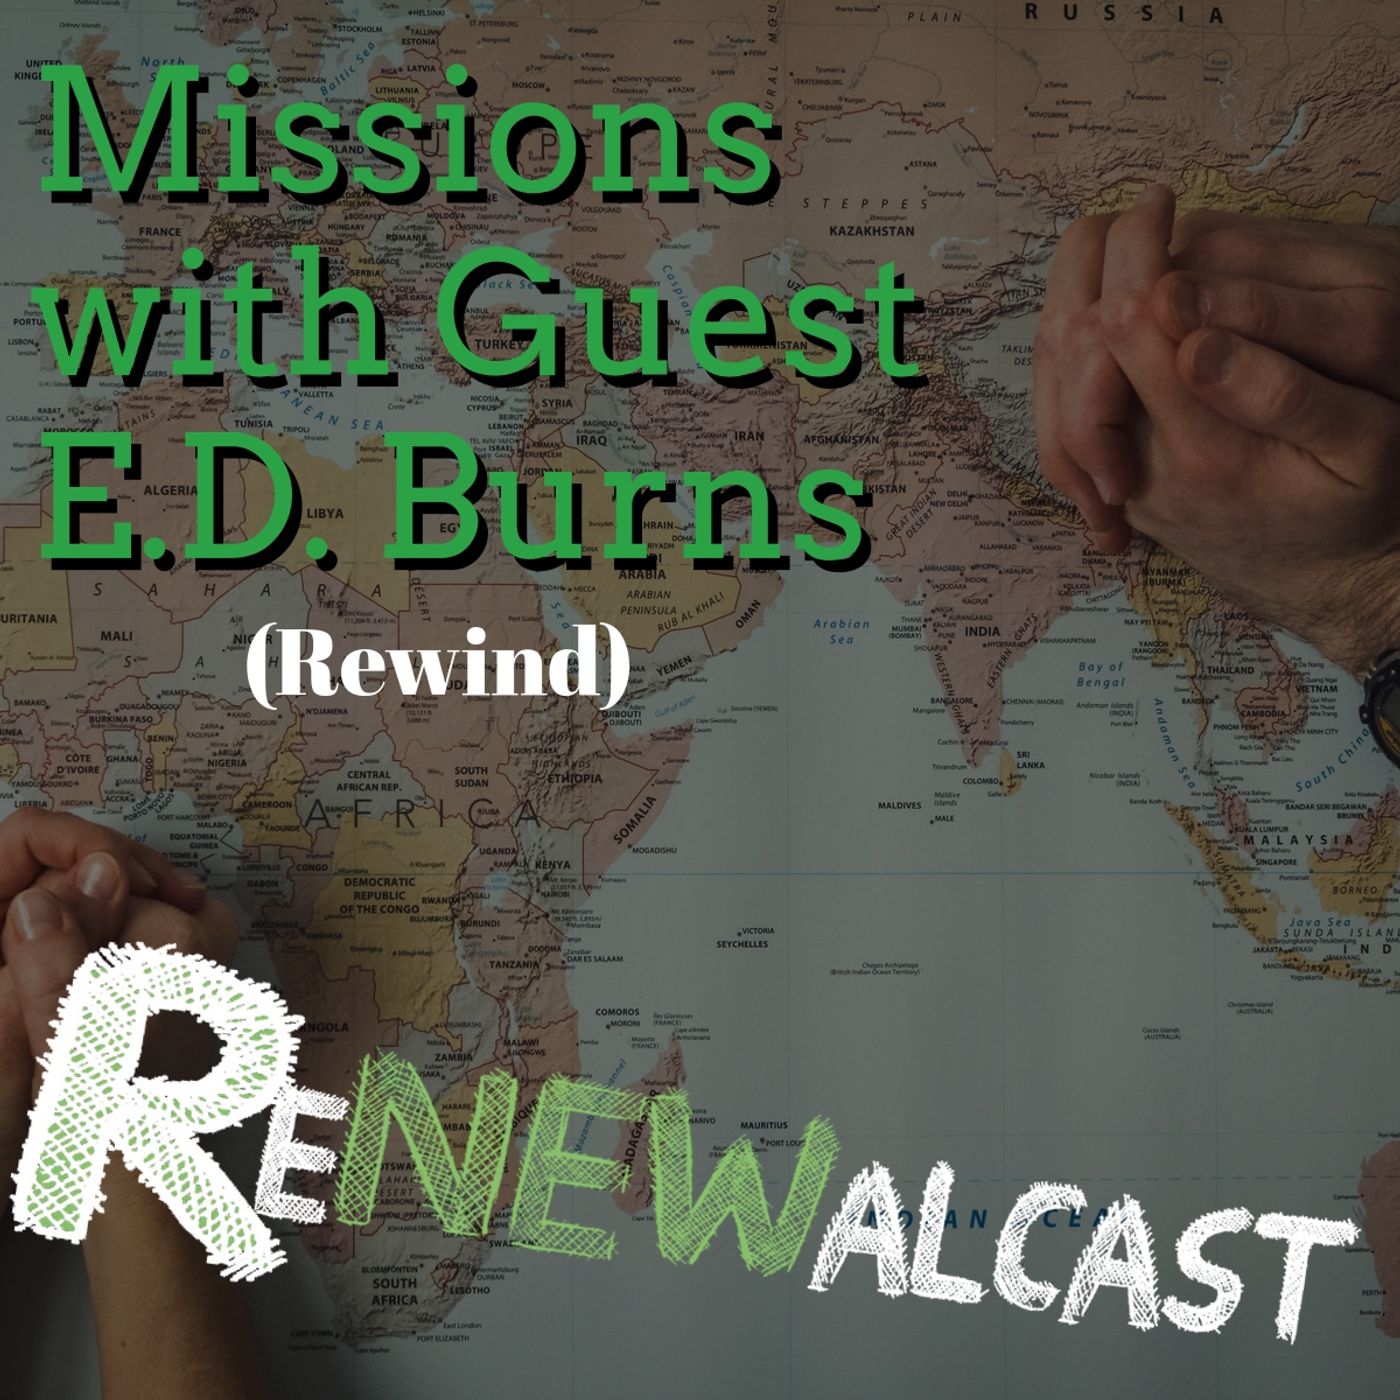 Missions with Guest E.D. Burns (Rewind)